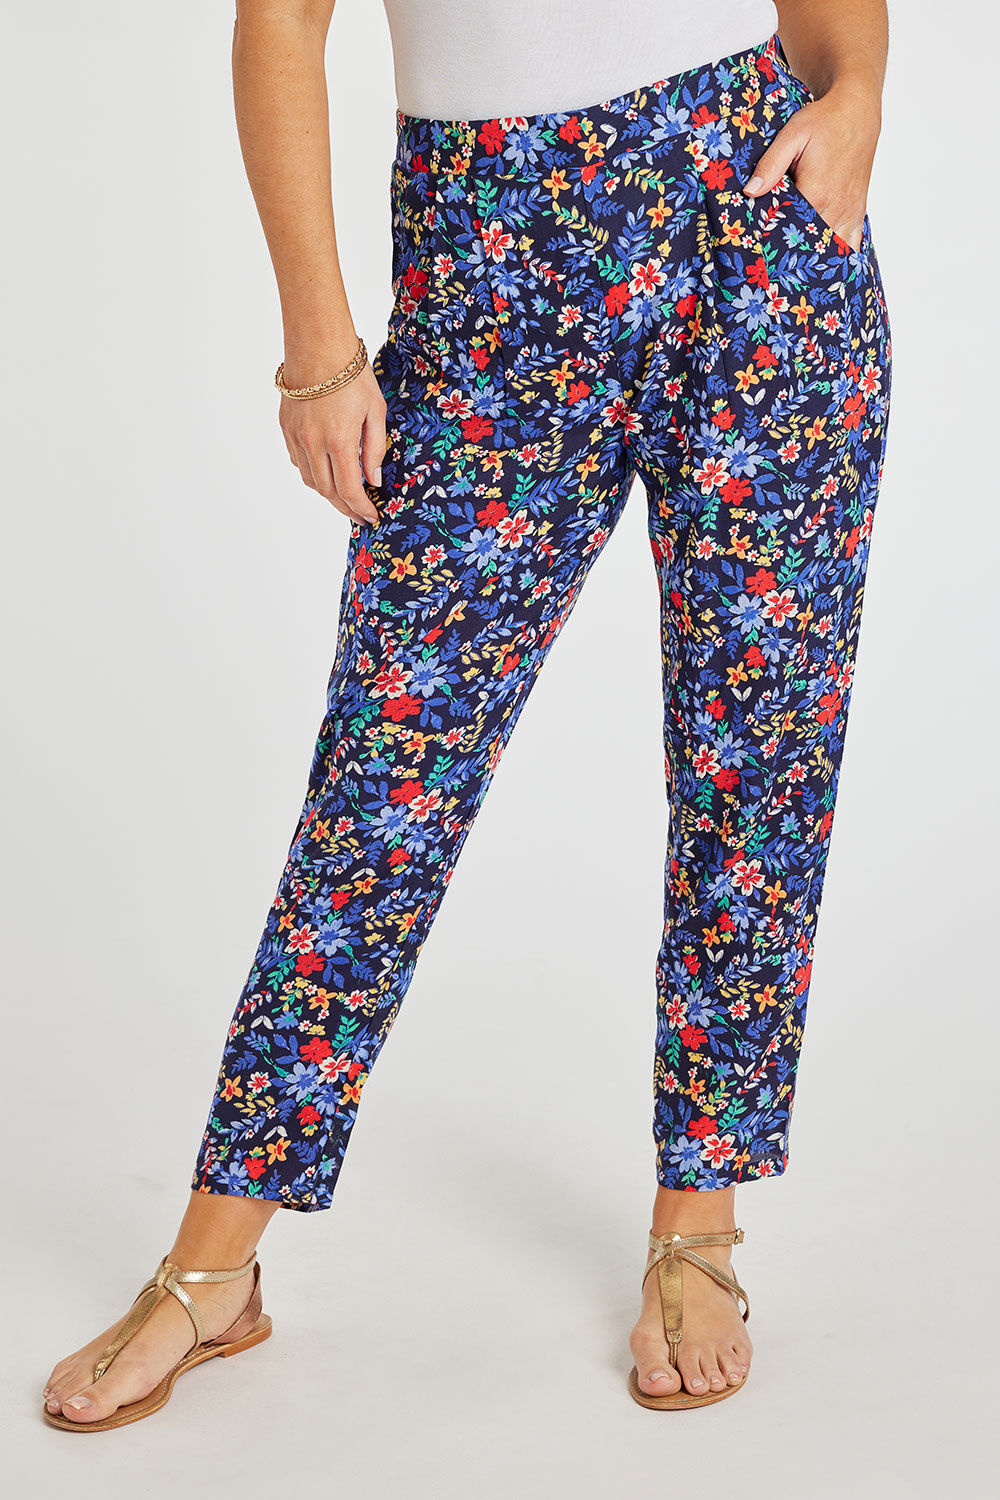 Bonmarche Navy/Red/White Ditsy Print Woven Elasticated Harem Pants